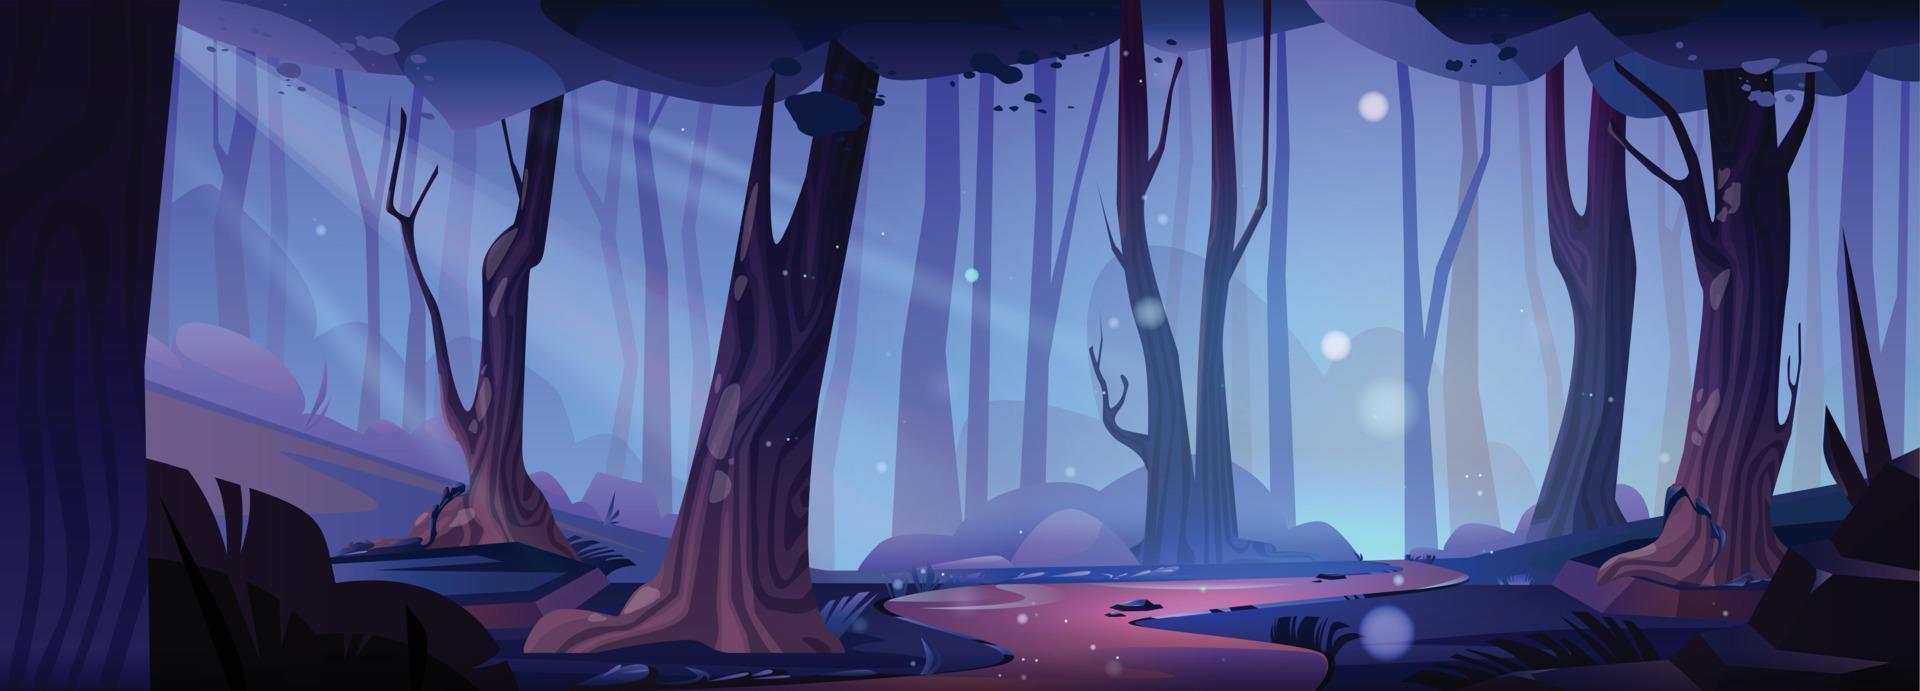 Path in forest at night cartoon vector landscape